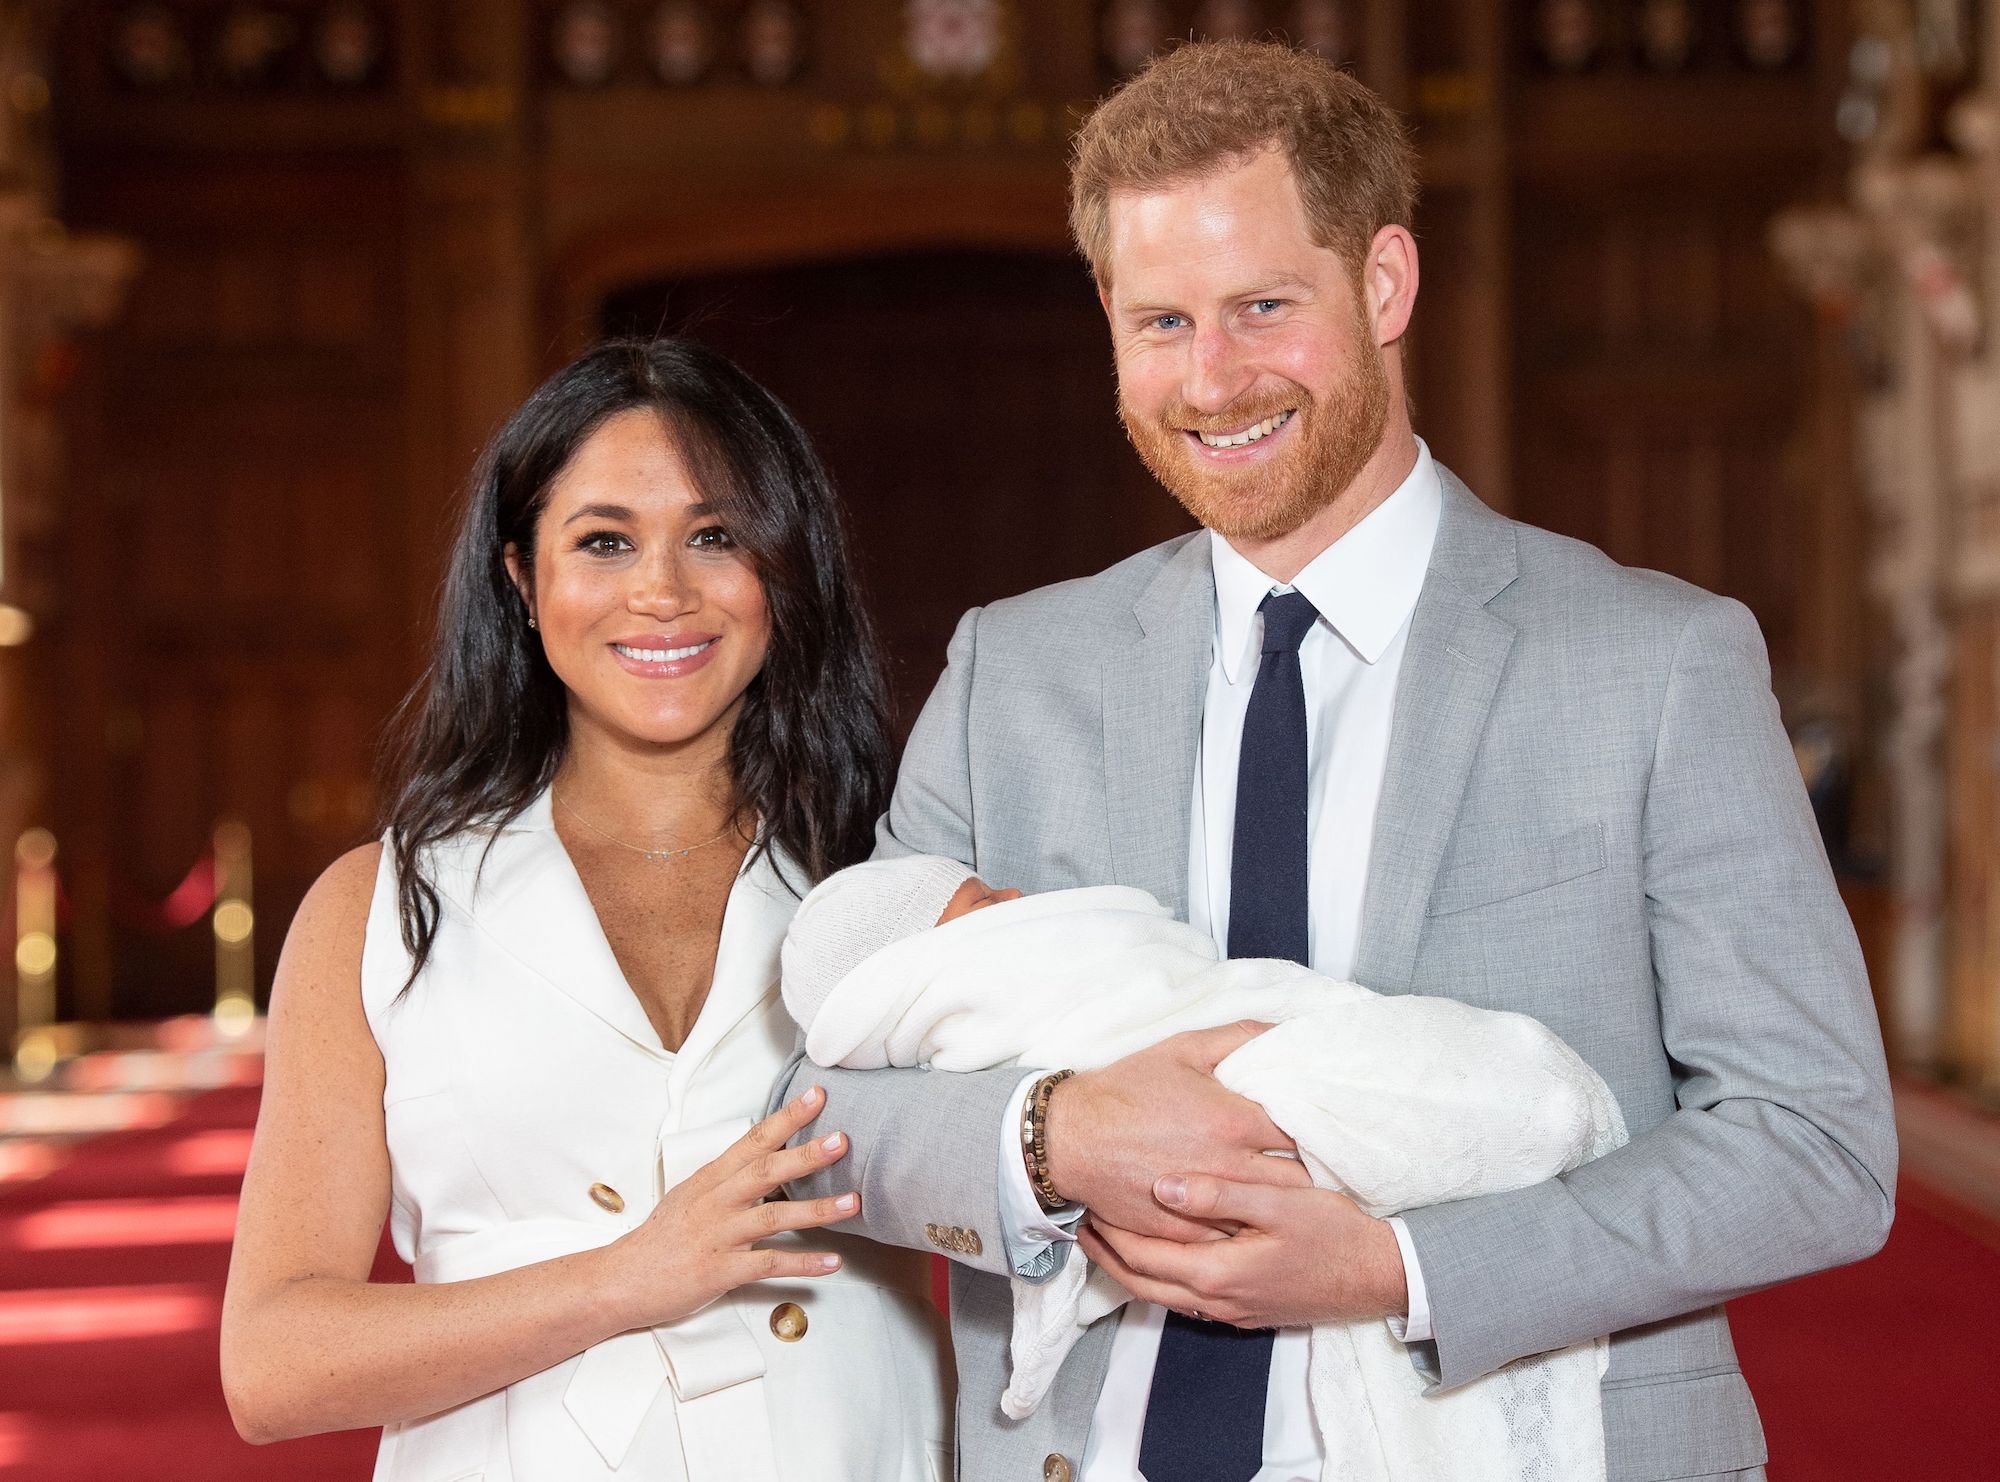 Britain's Prince Harry, Duke of Sussex, and his wife Meghan, Duchess of Sussex, pose for a photo with their newborn baby son on May 8, 2019. (Dominic Lipinski—Getty Images) (Dominic Lipinski—Getty Images)